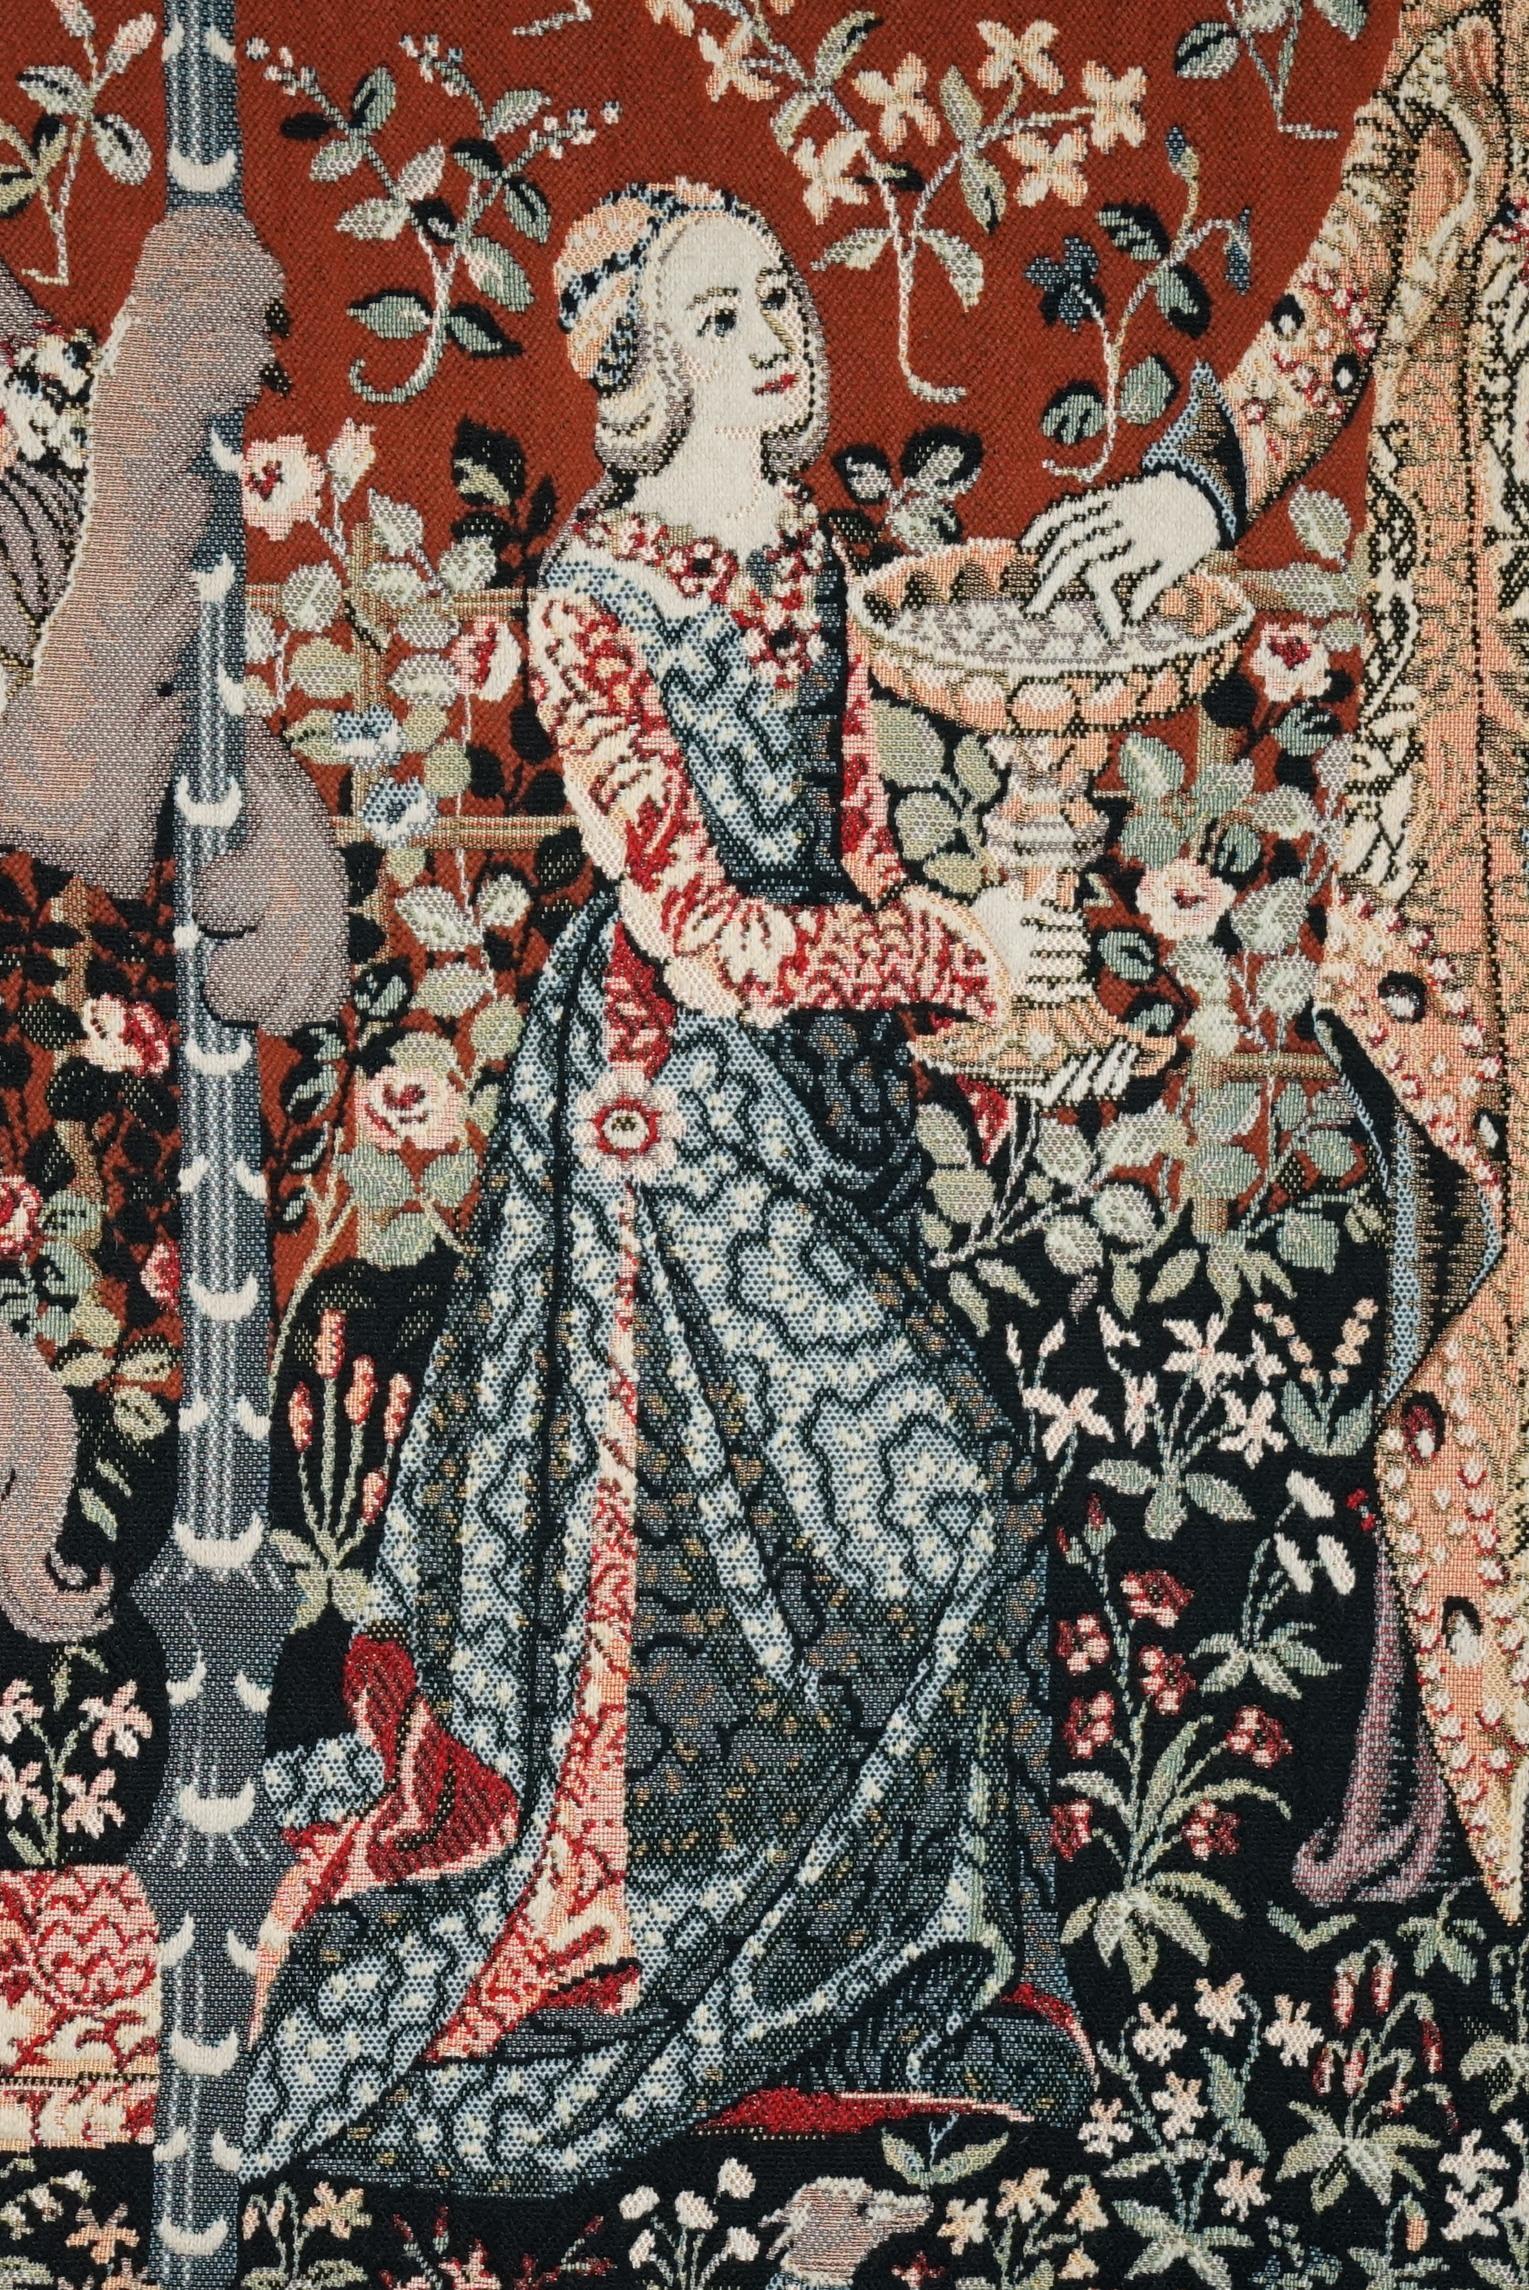 ViNTAGE THE LADY AND THE UNICORN LARGE WALL HANGING WOVEN TAPEStry 216CM X 189CM (Bestickt)